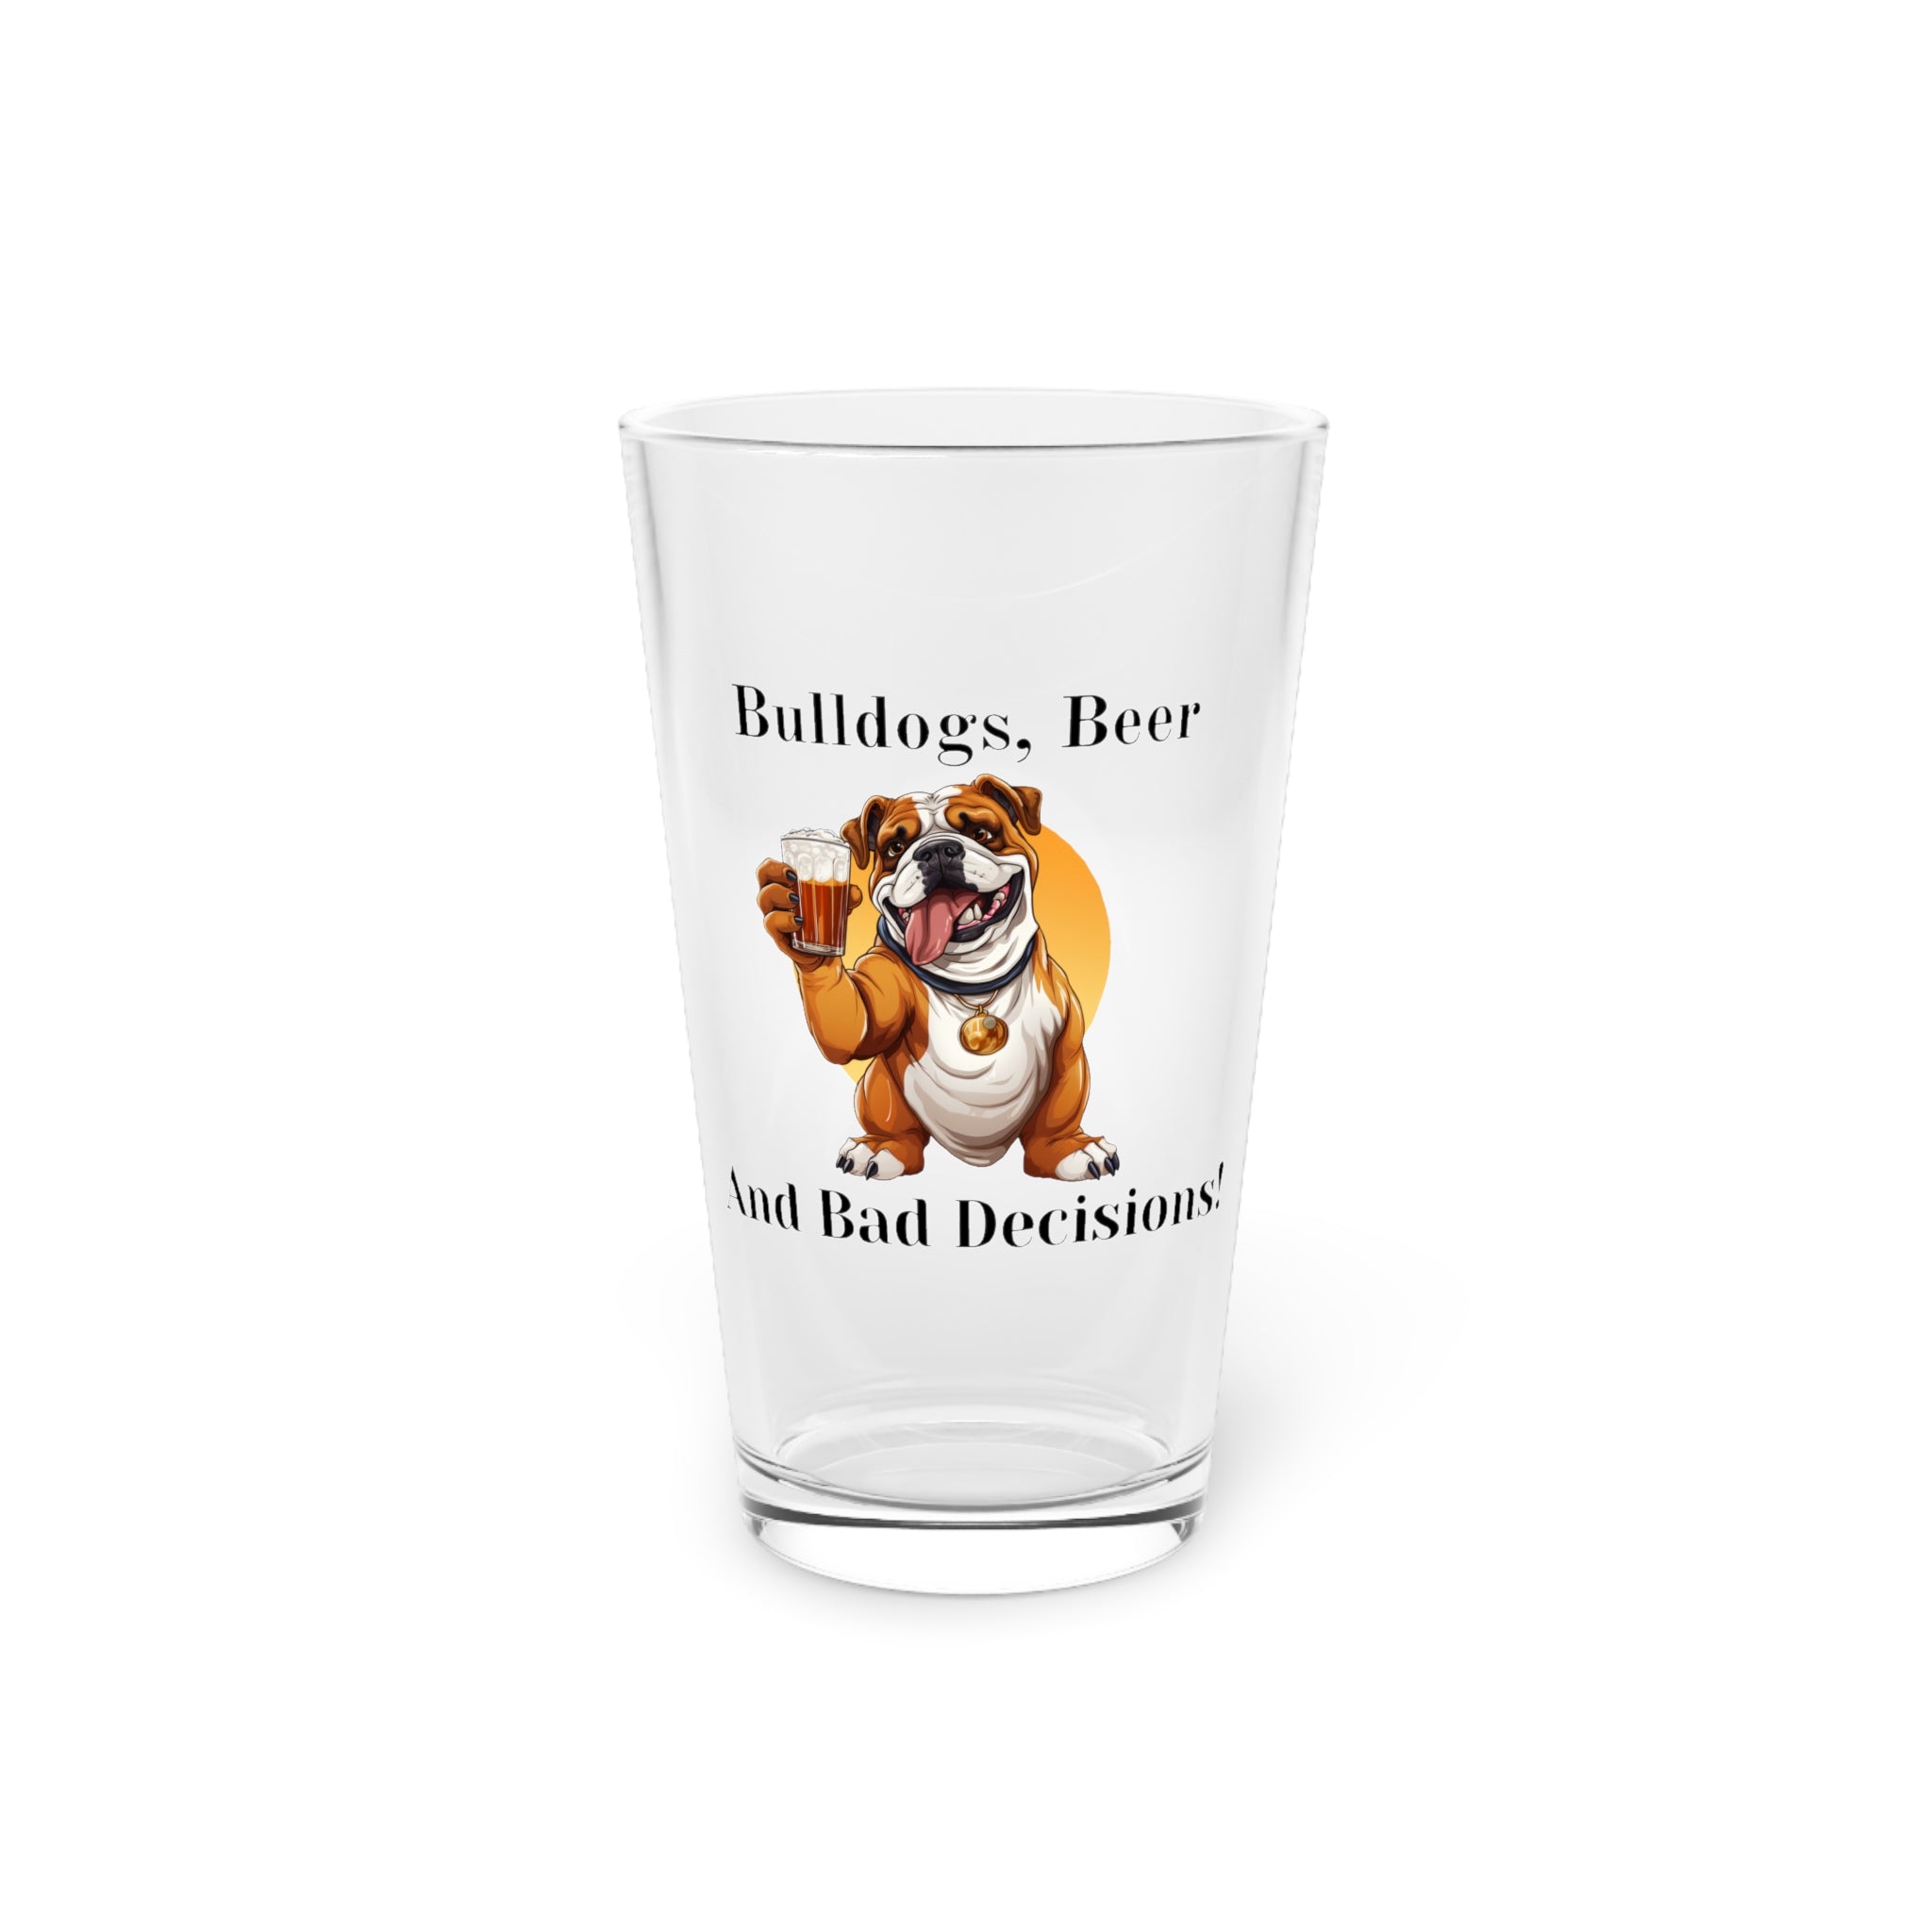 Bulldogs, Beer, and Bad Decisions!" - The Ultimate Pint Glass by Tipsy Bully (English/Brown)